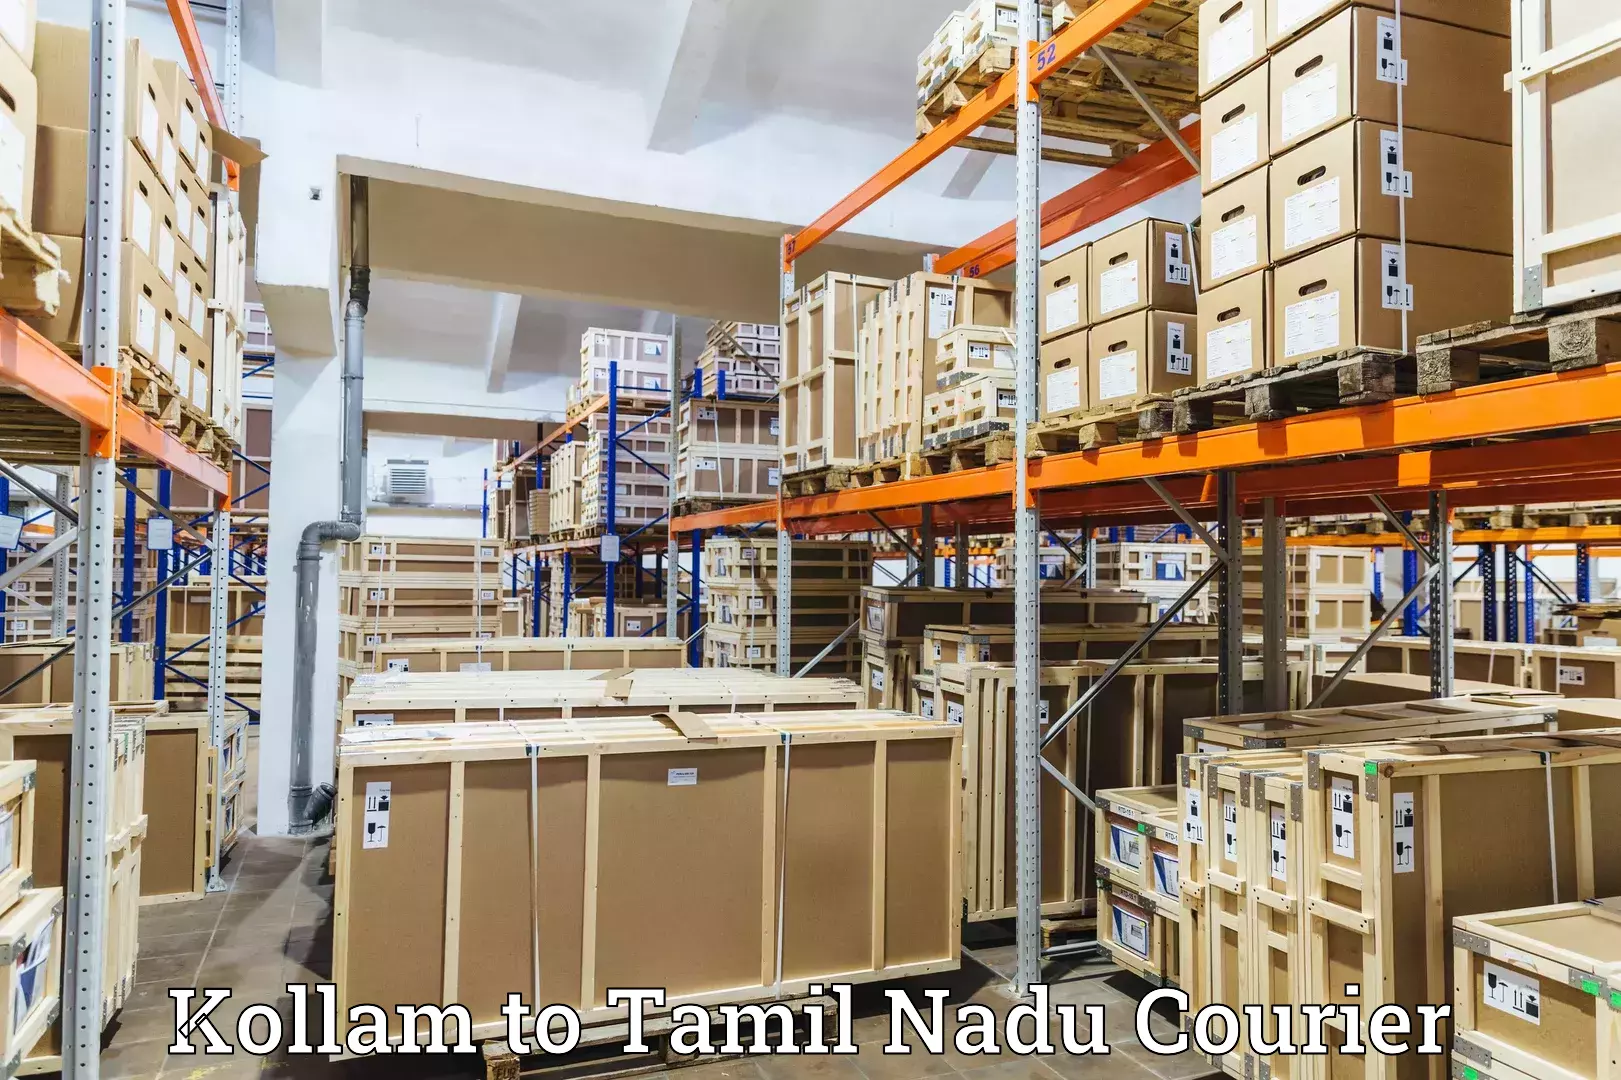 Local courier options Kollam to Omalur